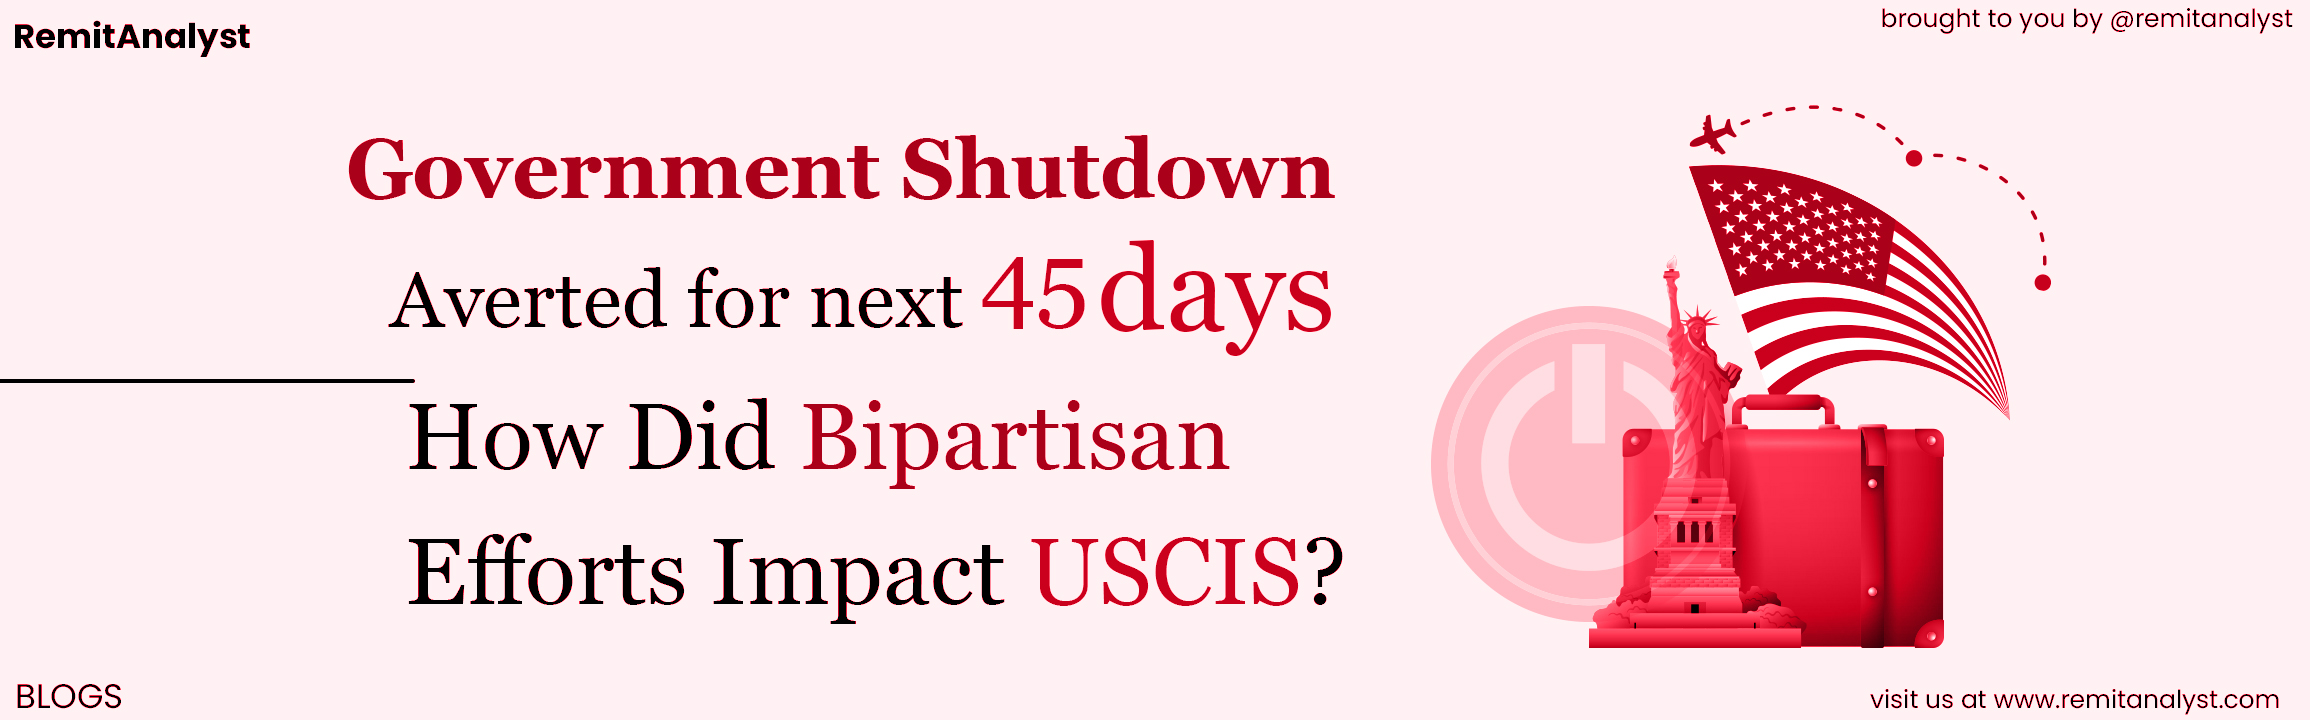 government-shutdown-averted-for-next-45-days-how-did-bipartisan-efforts-impact-uscis-title